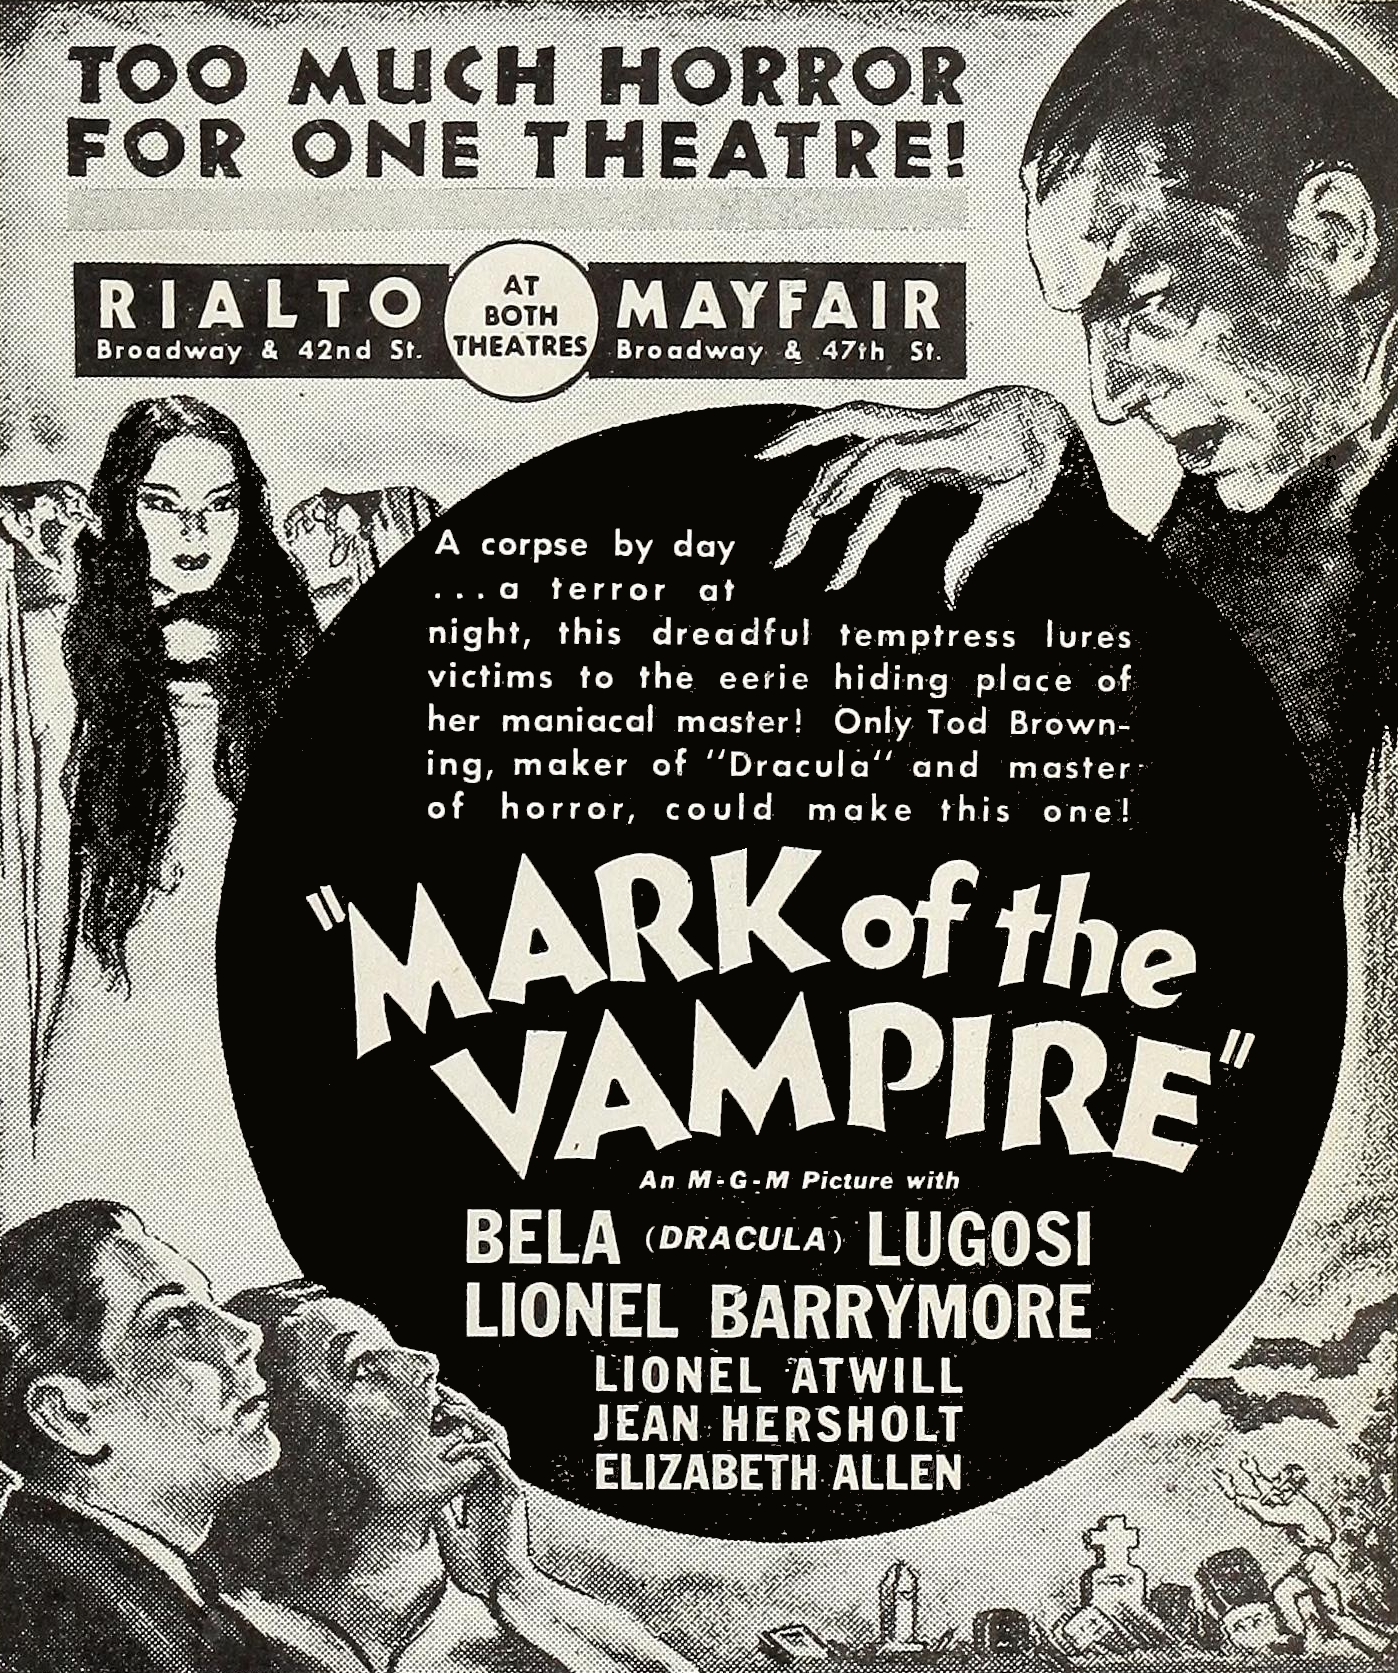 Watch More Movies — A Century of Glamour Ghouls: 1910s